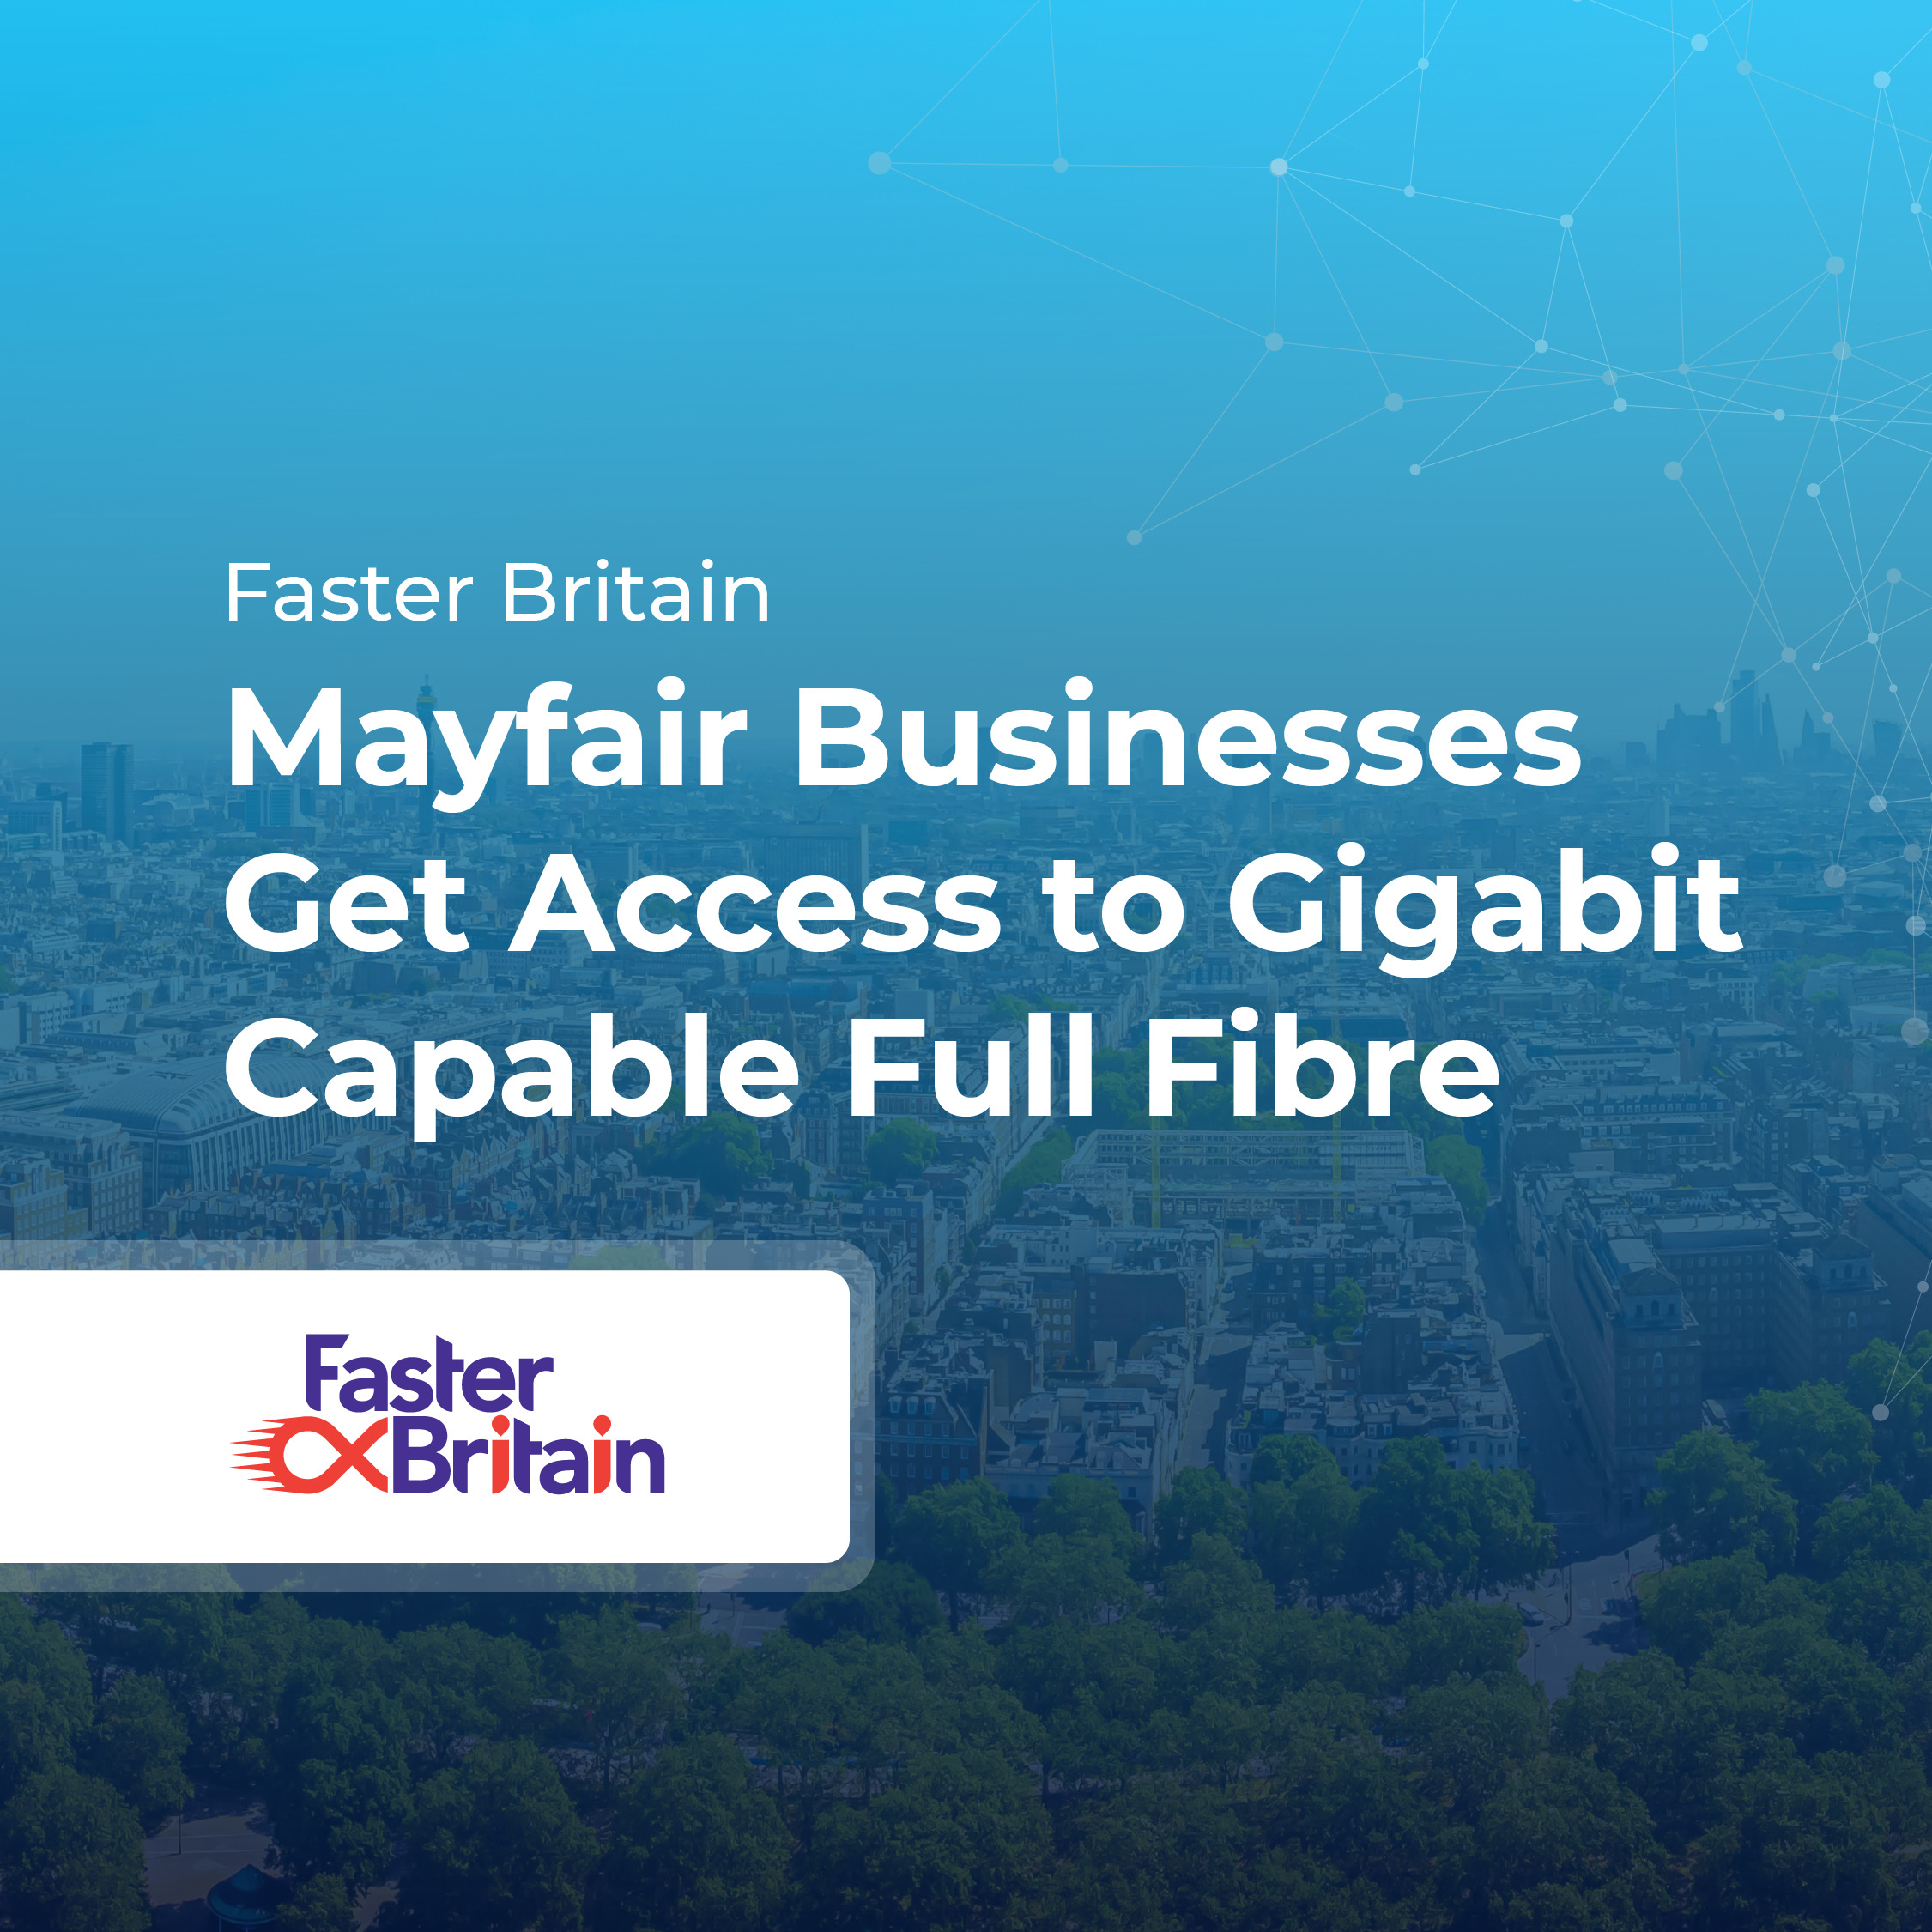 Mayfair Businesses Get Access to Full Fibre Connectivity